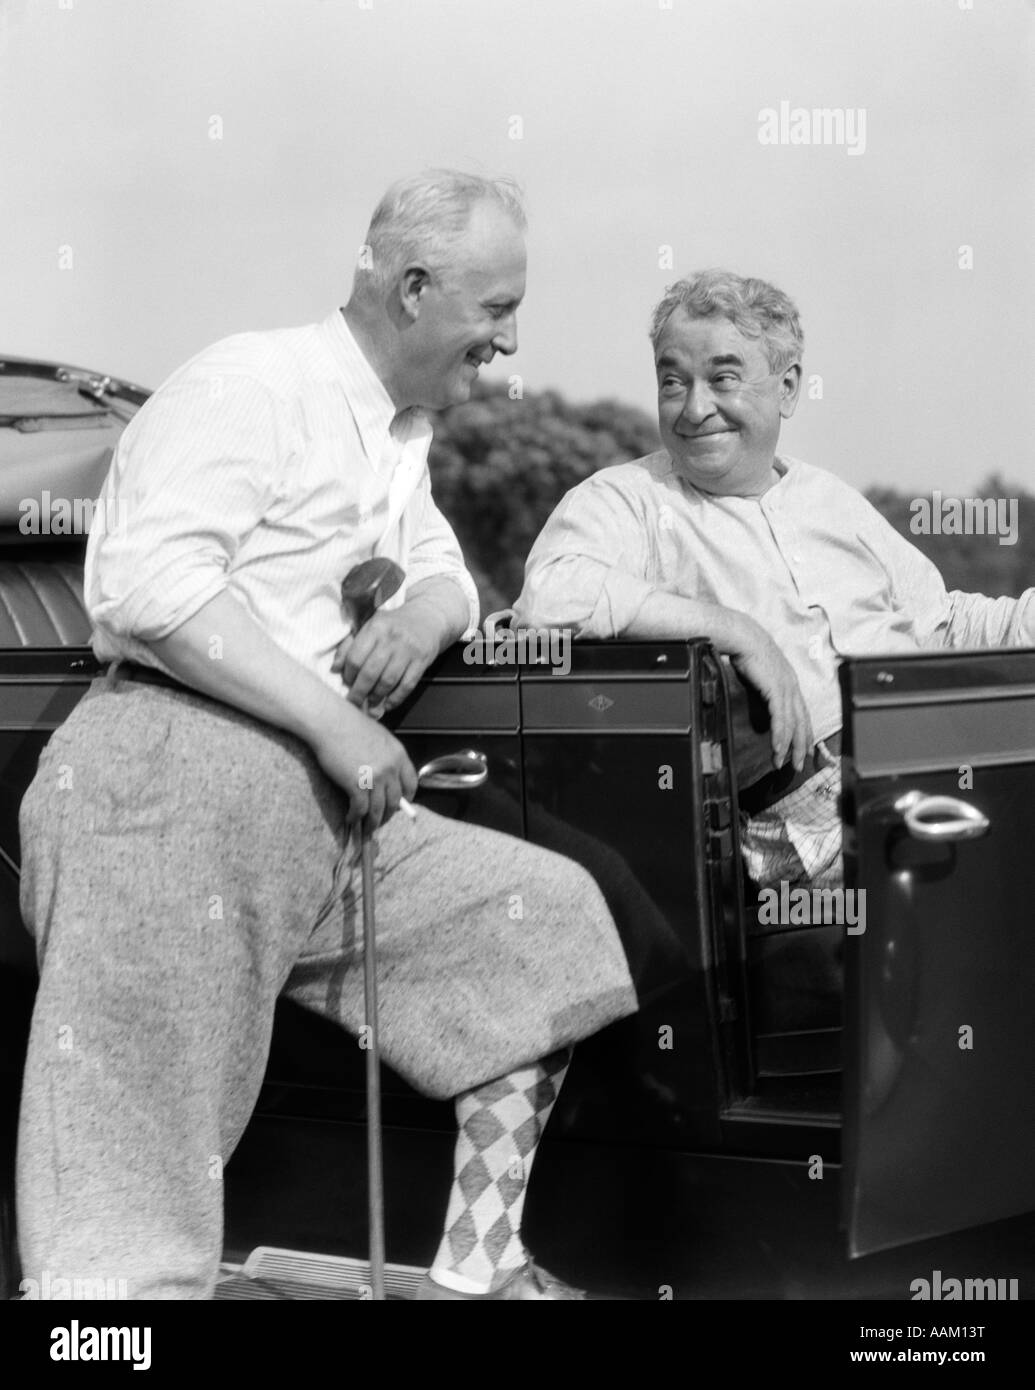 1920s 1930s ELDERLY MAN LEANING ON RUNNING BOARD OF CAR HOLDING GOLF CLUB & TALKING TO ANOTHER MAN SITTING IN THE CAR Stock Photo